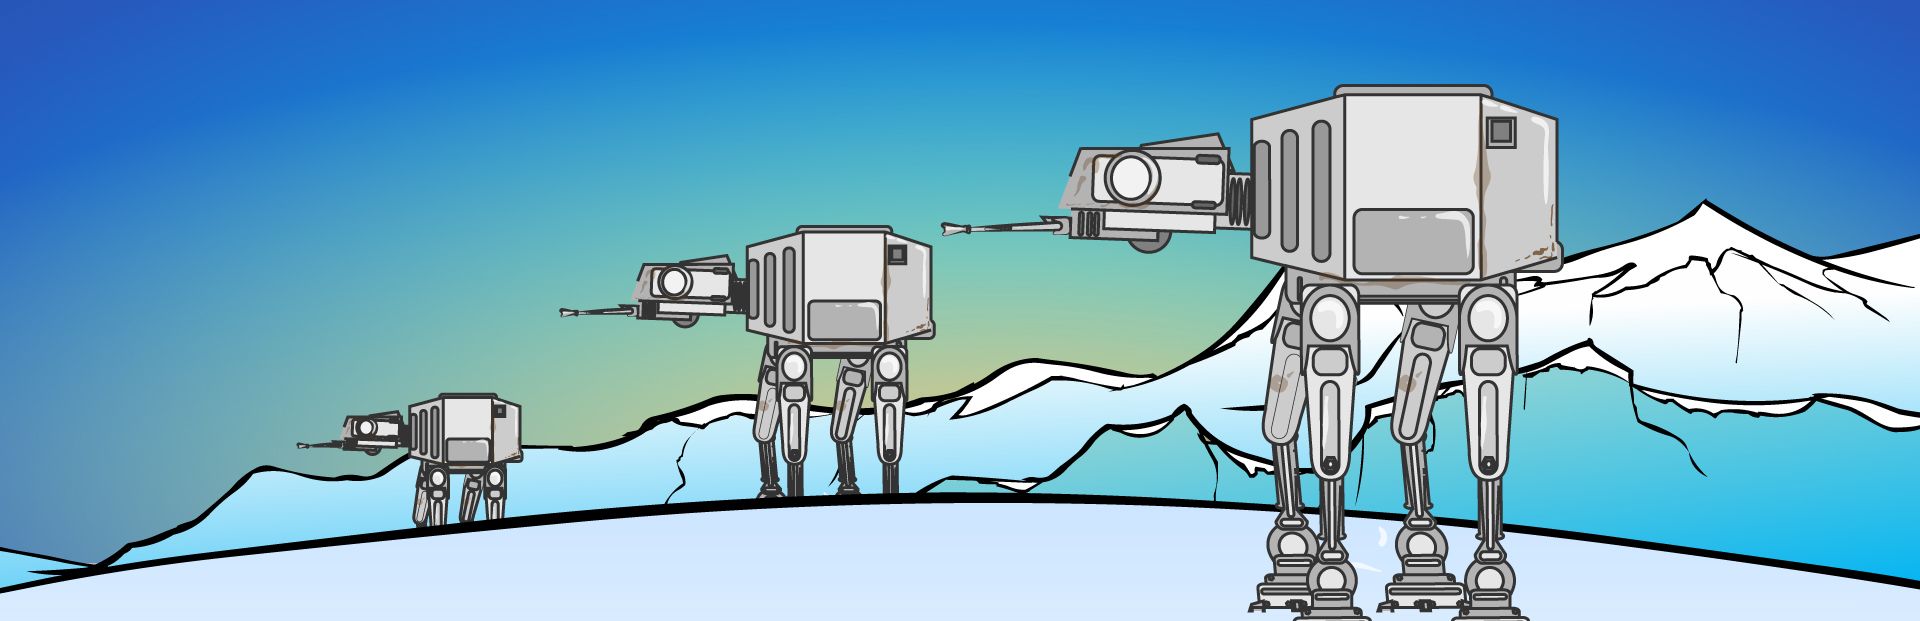 The Secrets of Hoth 3